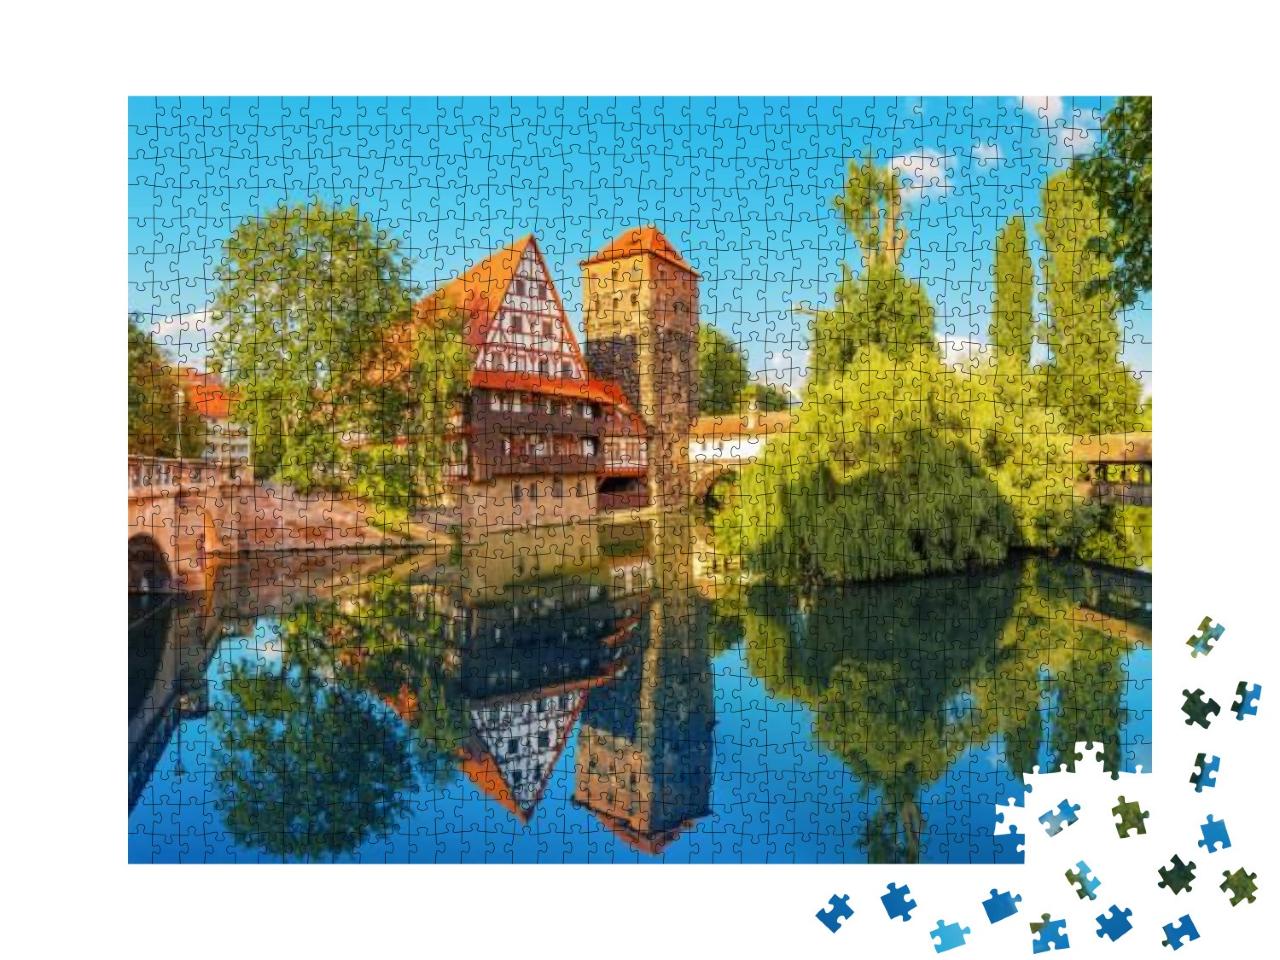 A Colorful & Picturesque View of the Half-Timbered Old Ho... Jigsaw Puzzle with 1000 pieces